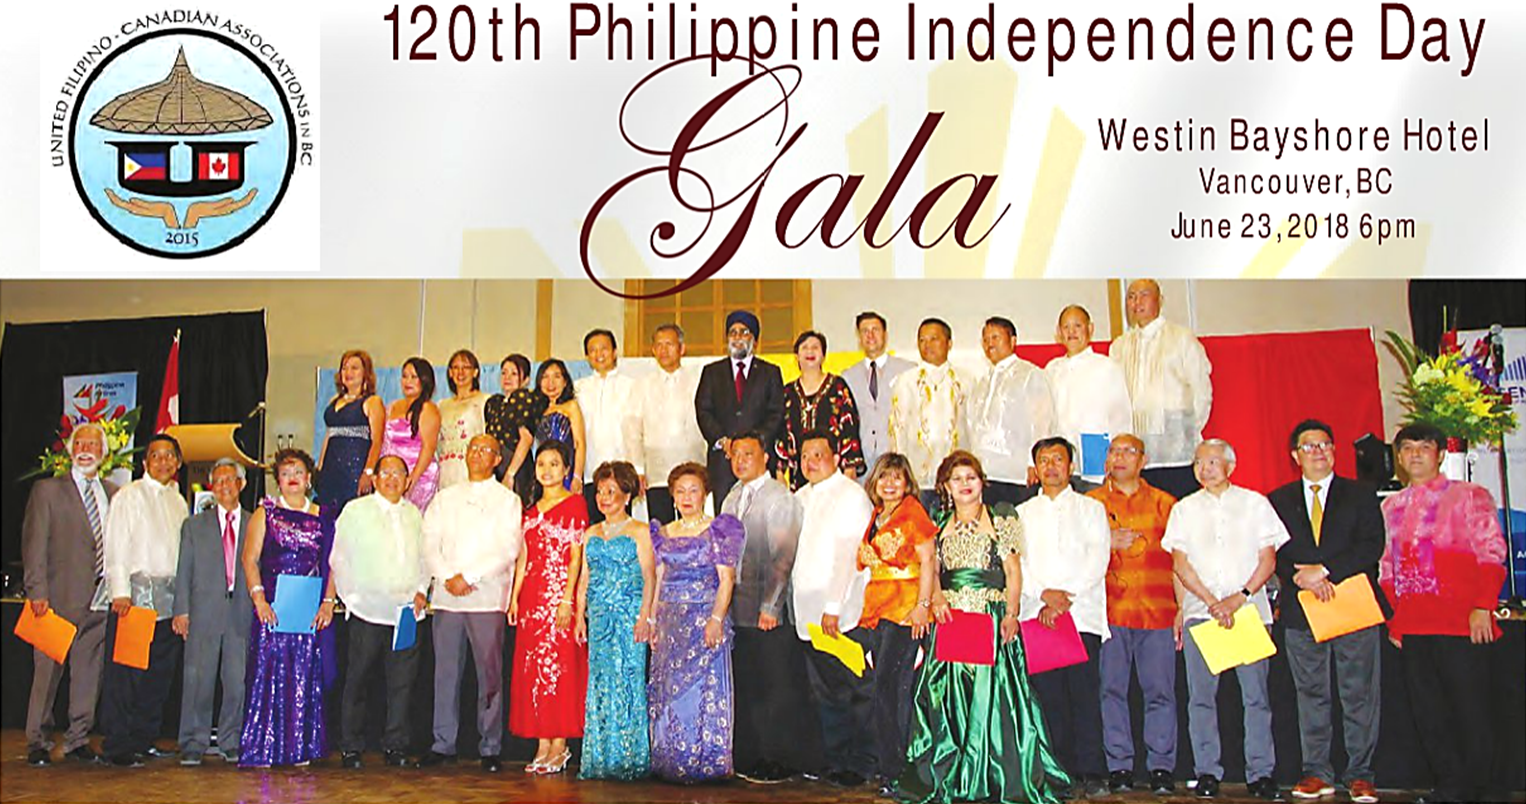 120th Philippine Independence Day Gala Surrey Filipino Canadian